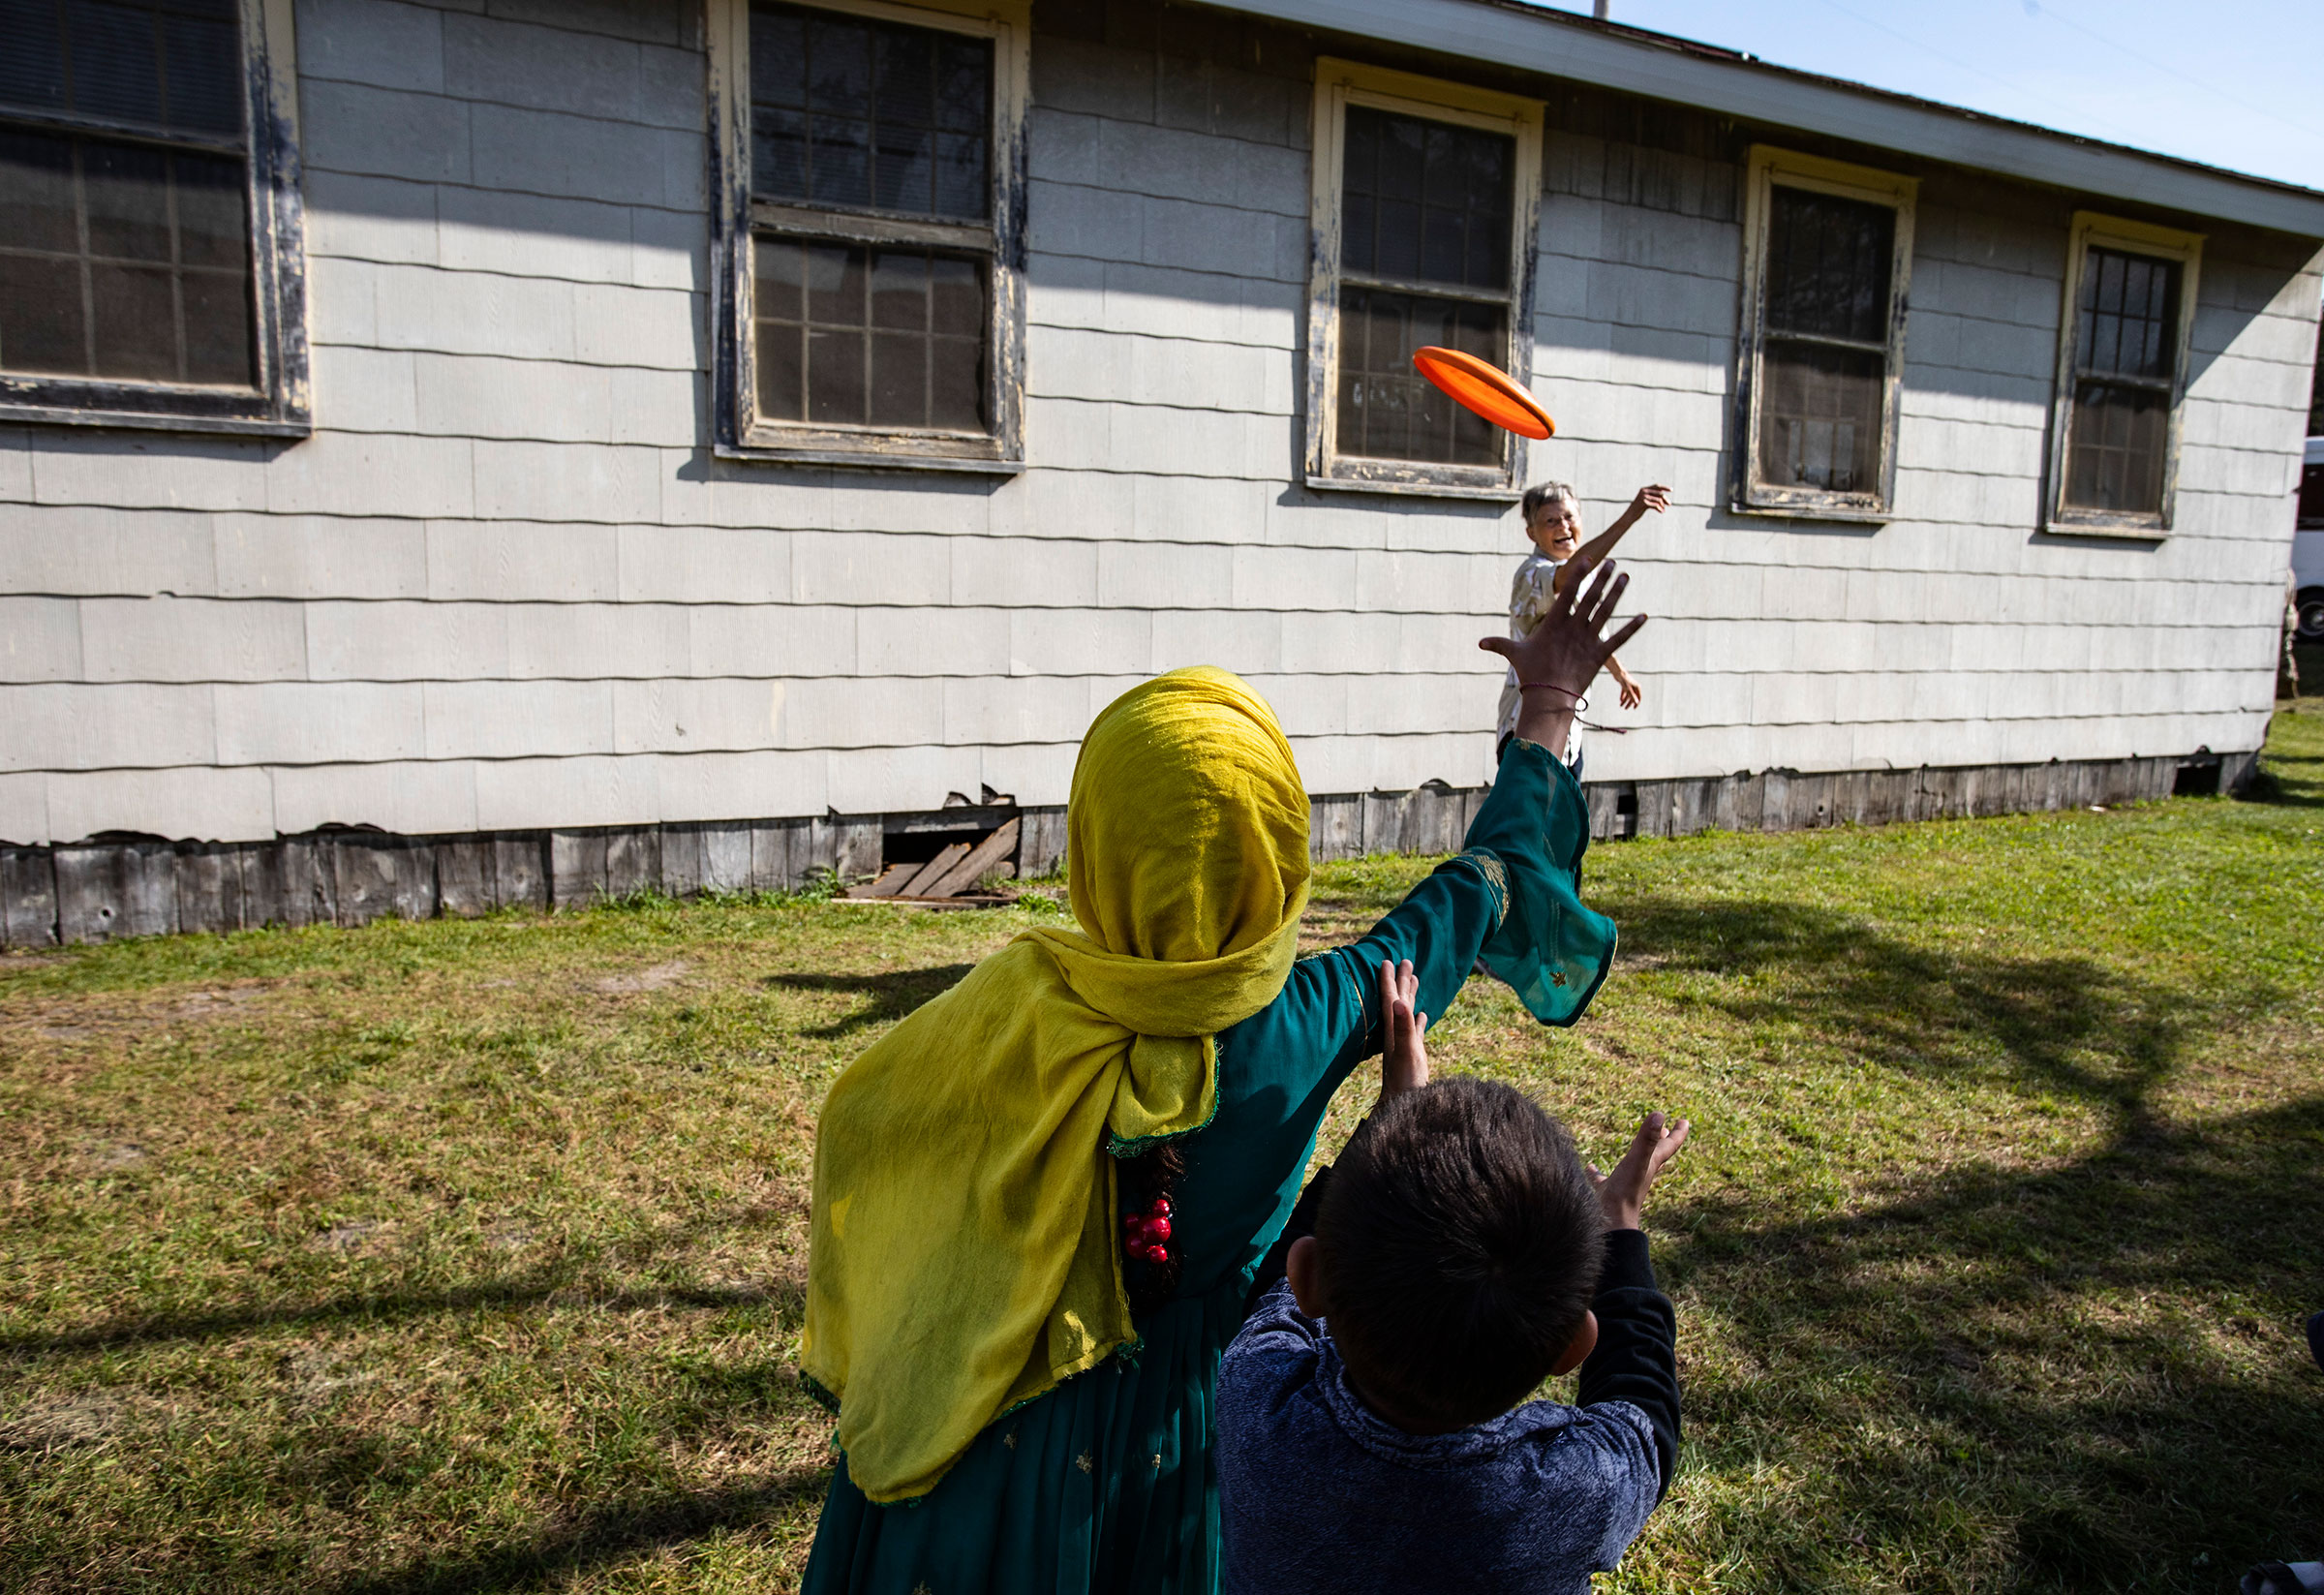 Volunteer Sandra Hoeser plays frisbee with Afghan refugees at the Ft. McCoy U.S. Army base on September 30, 2021 in Ft. McCoy, Wisconsin. (Barbara Davidson—Getty Images)